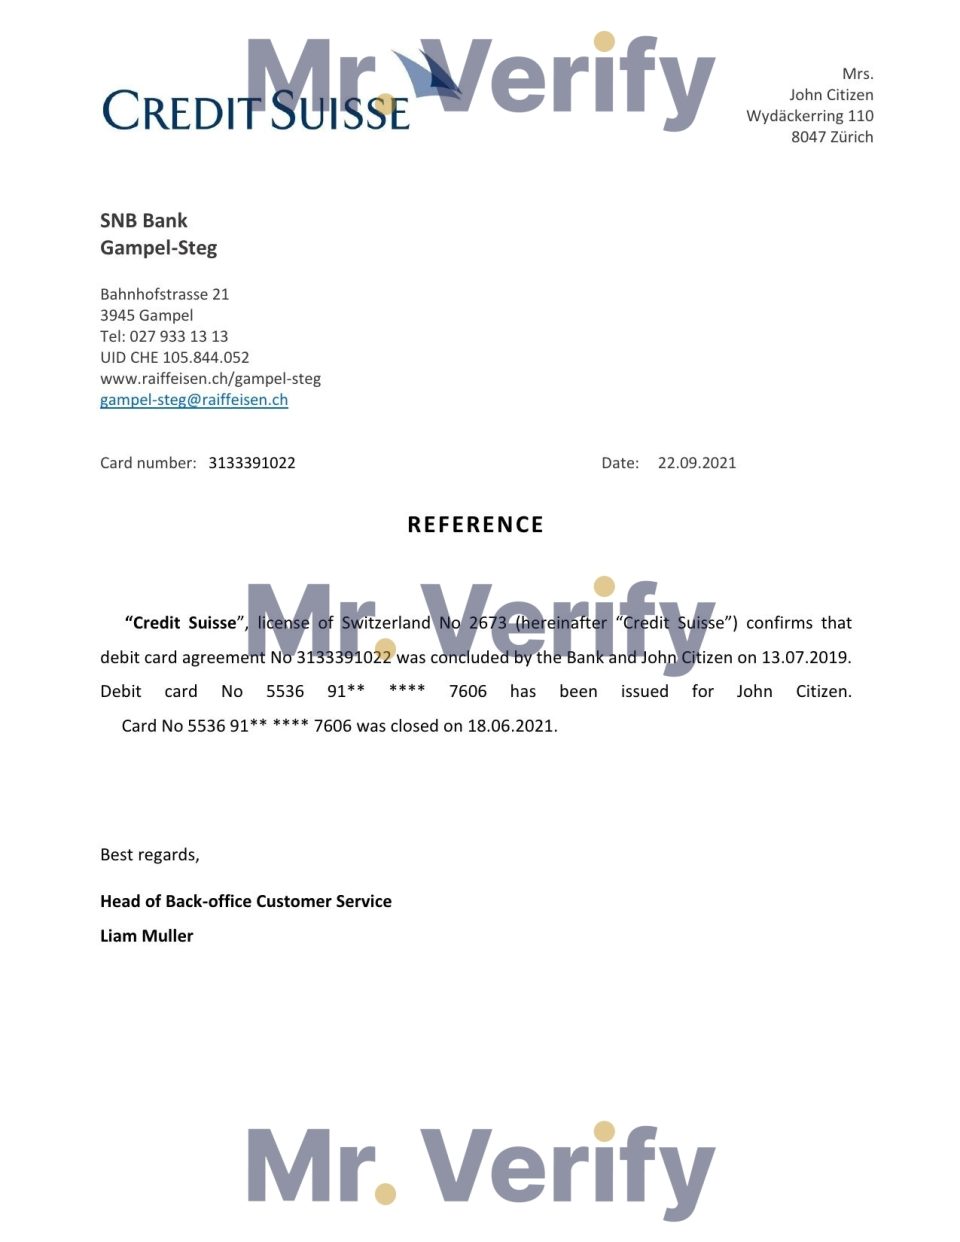 Download Switzerland Credit Suisse Bank Reference Letter Templates | Editable Word